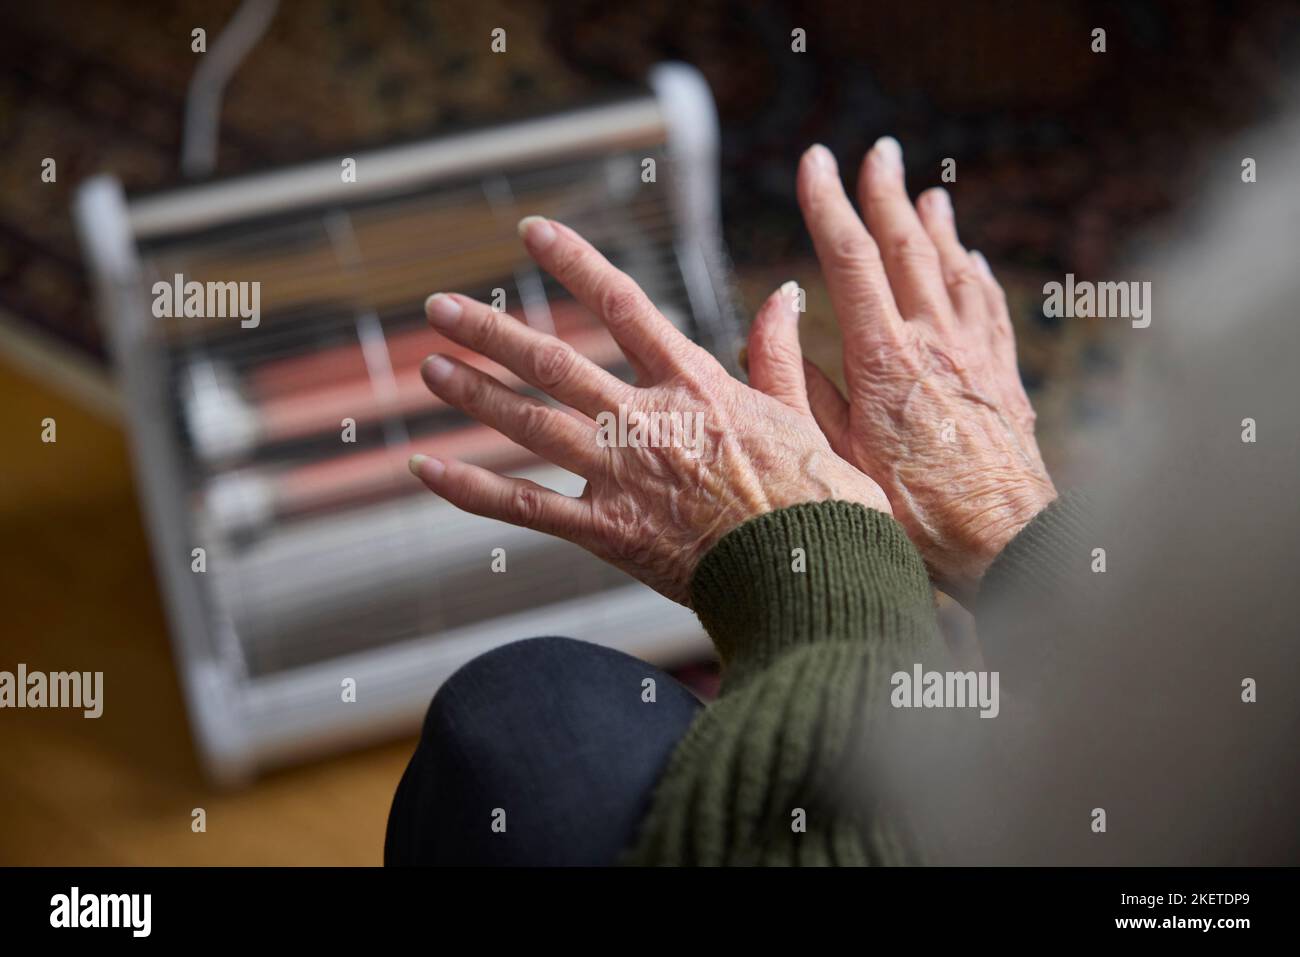 Close Up Of Senior Woman Warming Hands On Electric Heater In Cosyt Of Living Energy Crisis Stock Photo